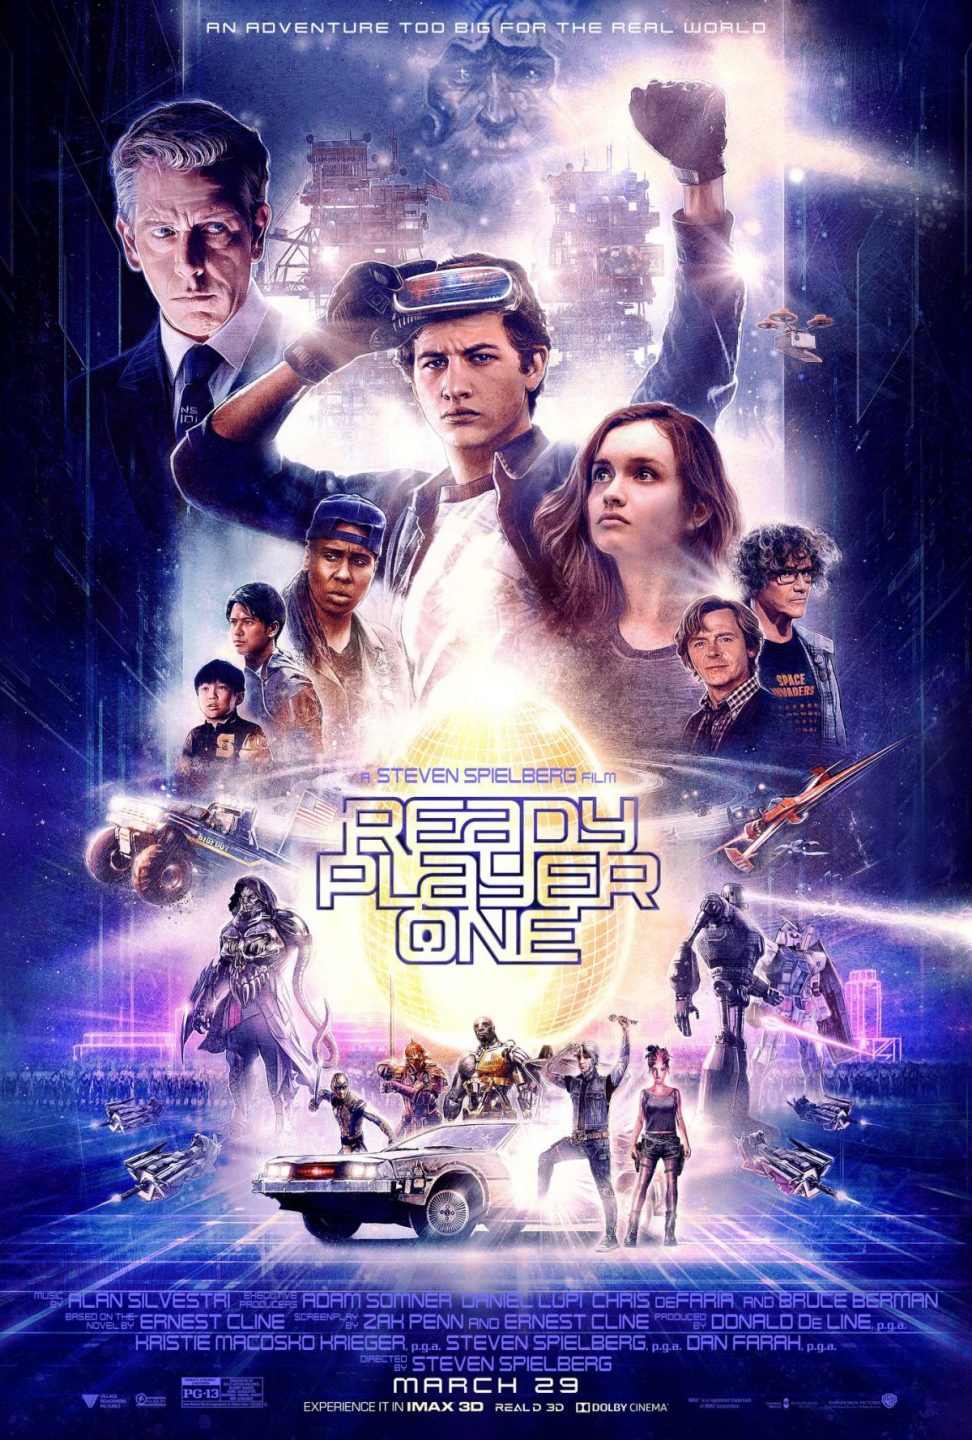 Ready Player One poster (Warner Bros. Pictures)